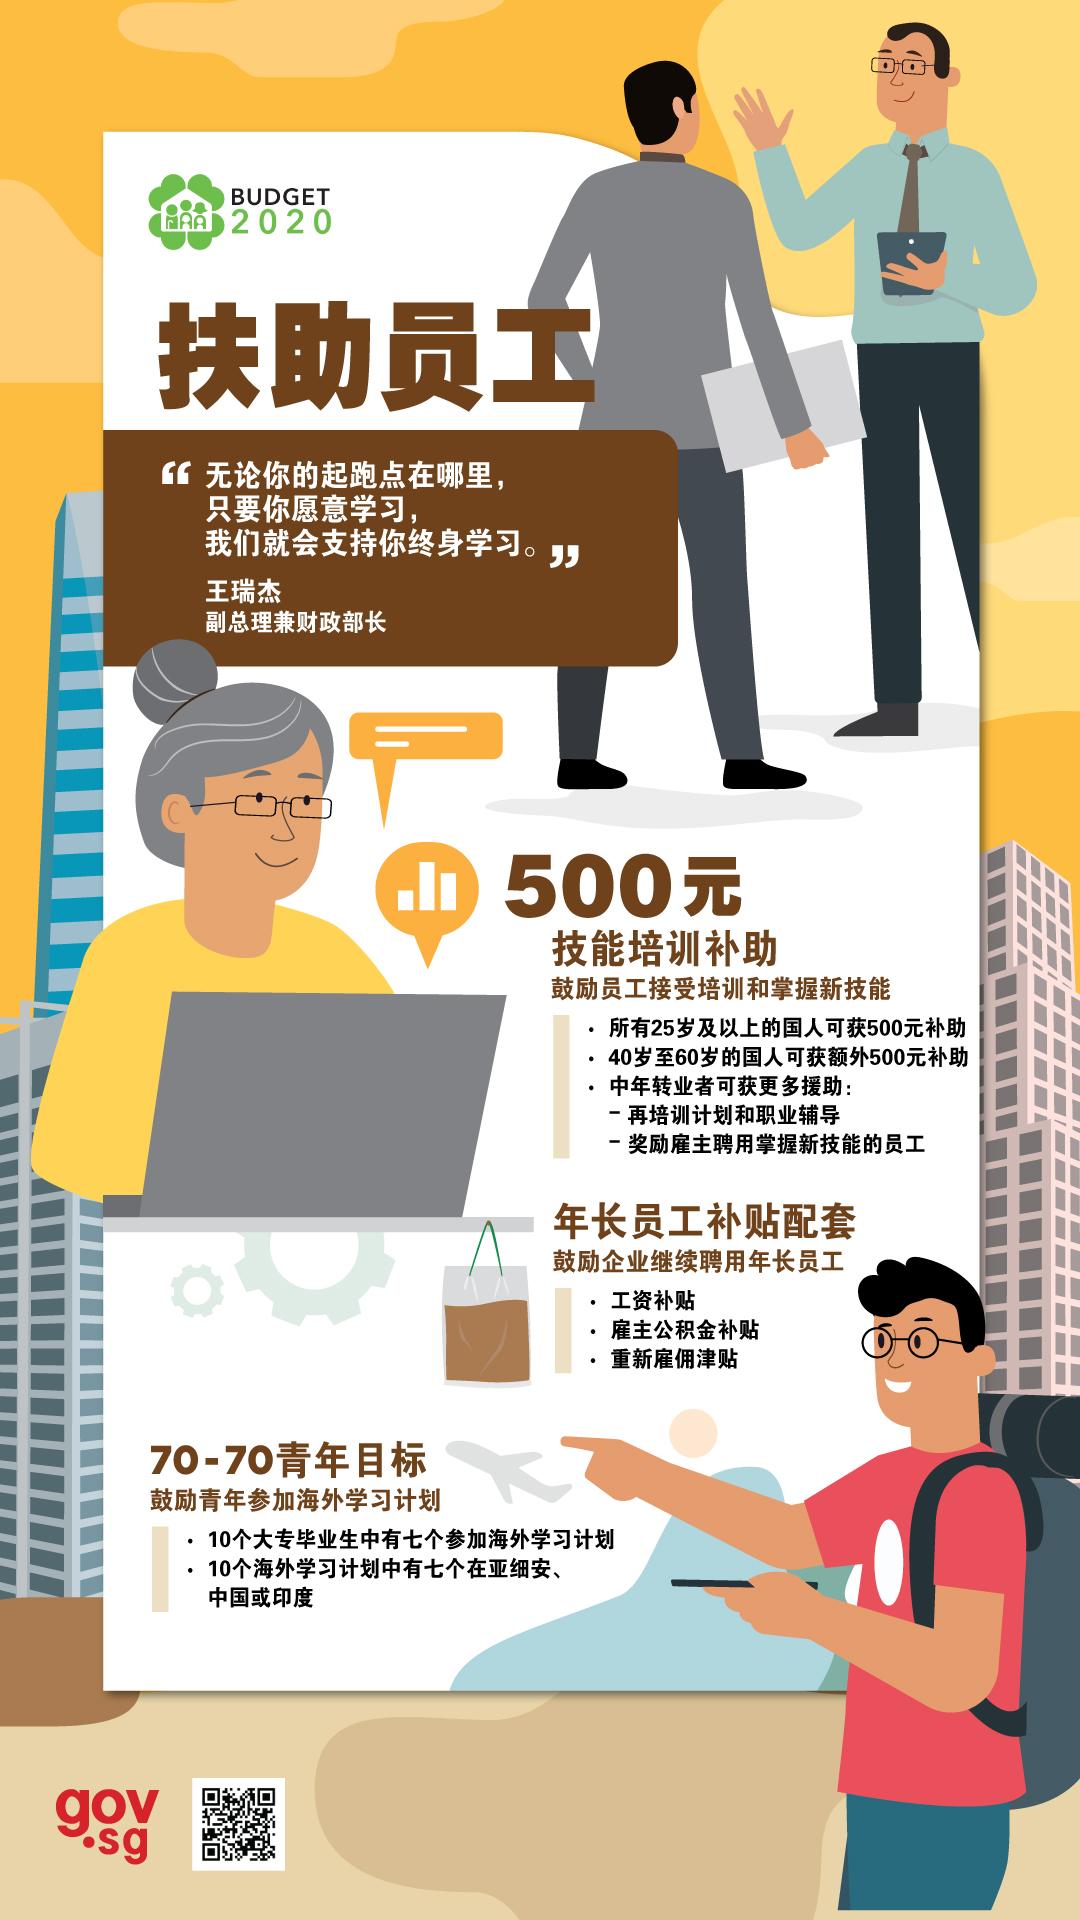 Chinese - Helping workers stay employed and have good jobs